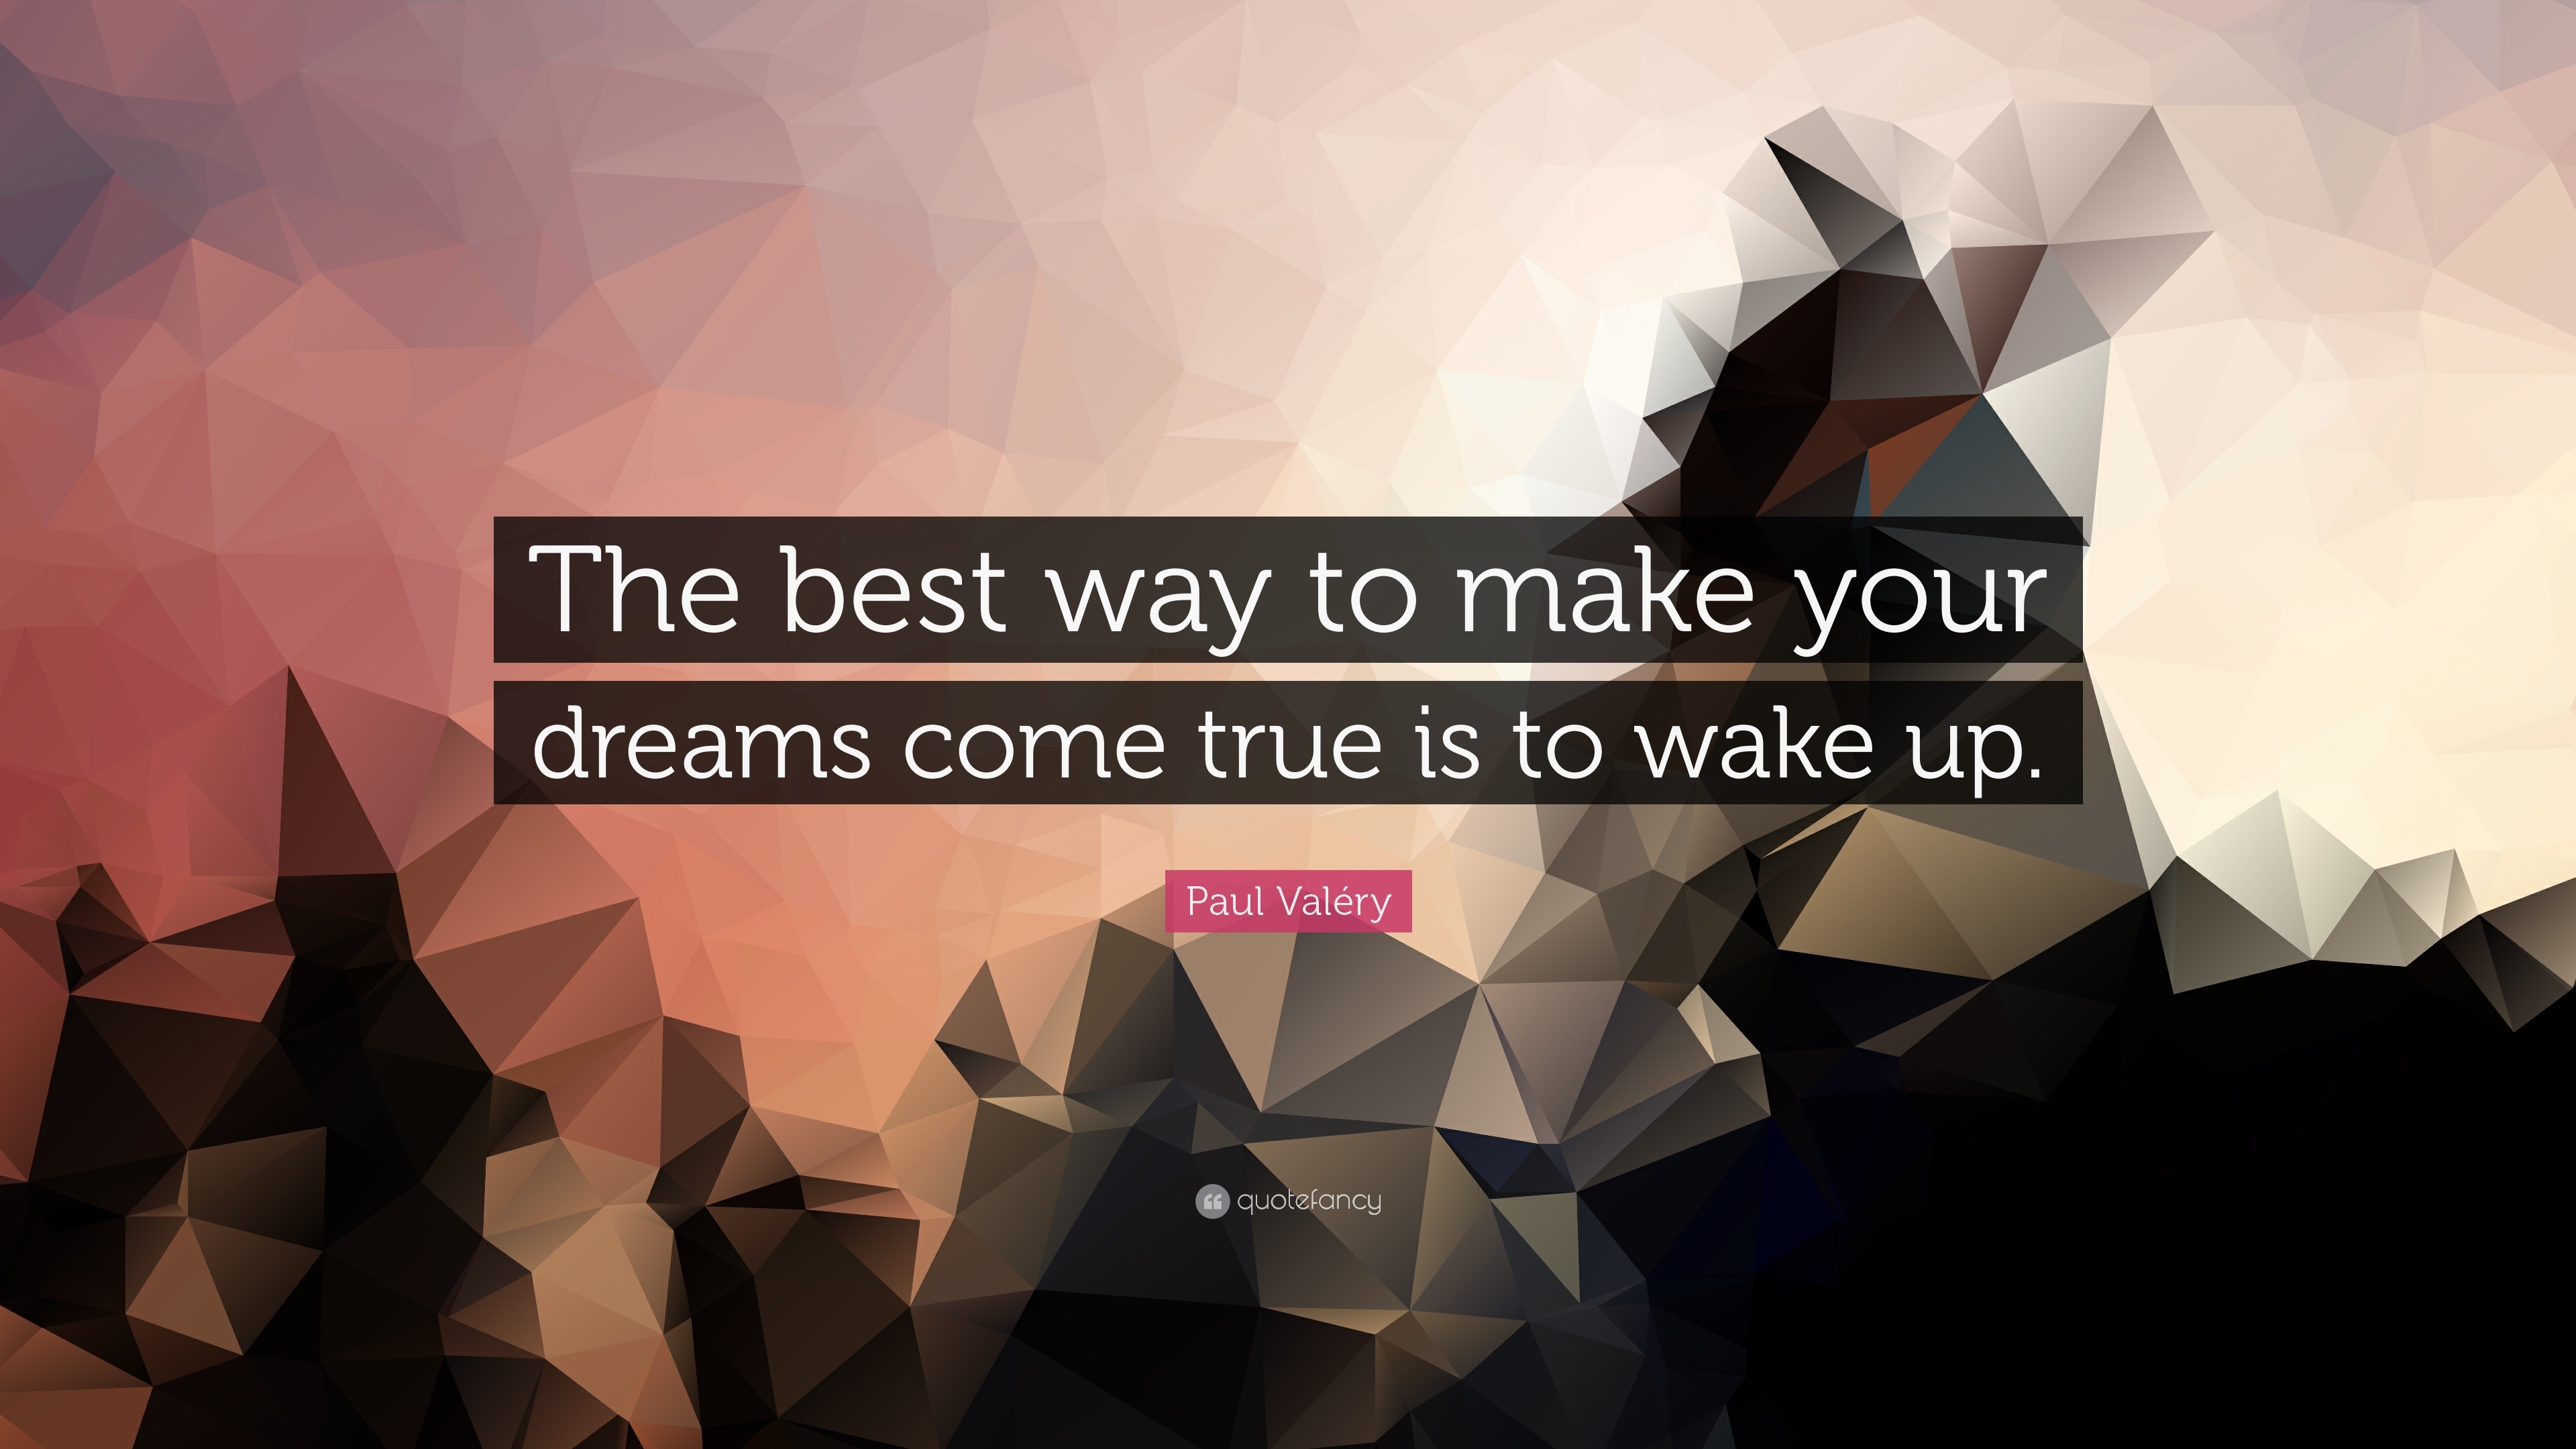 Paul Valéry Quote: “The best way to make your dreams come true is to wake up ...3840 x 2160